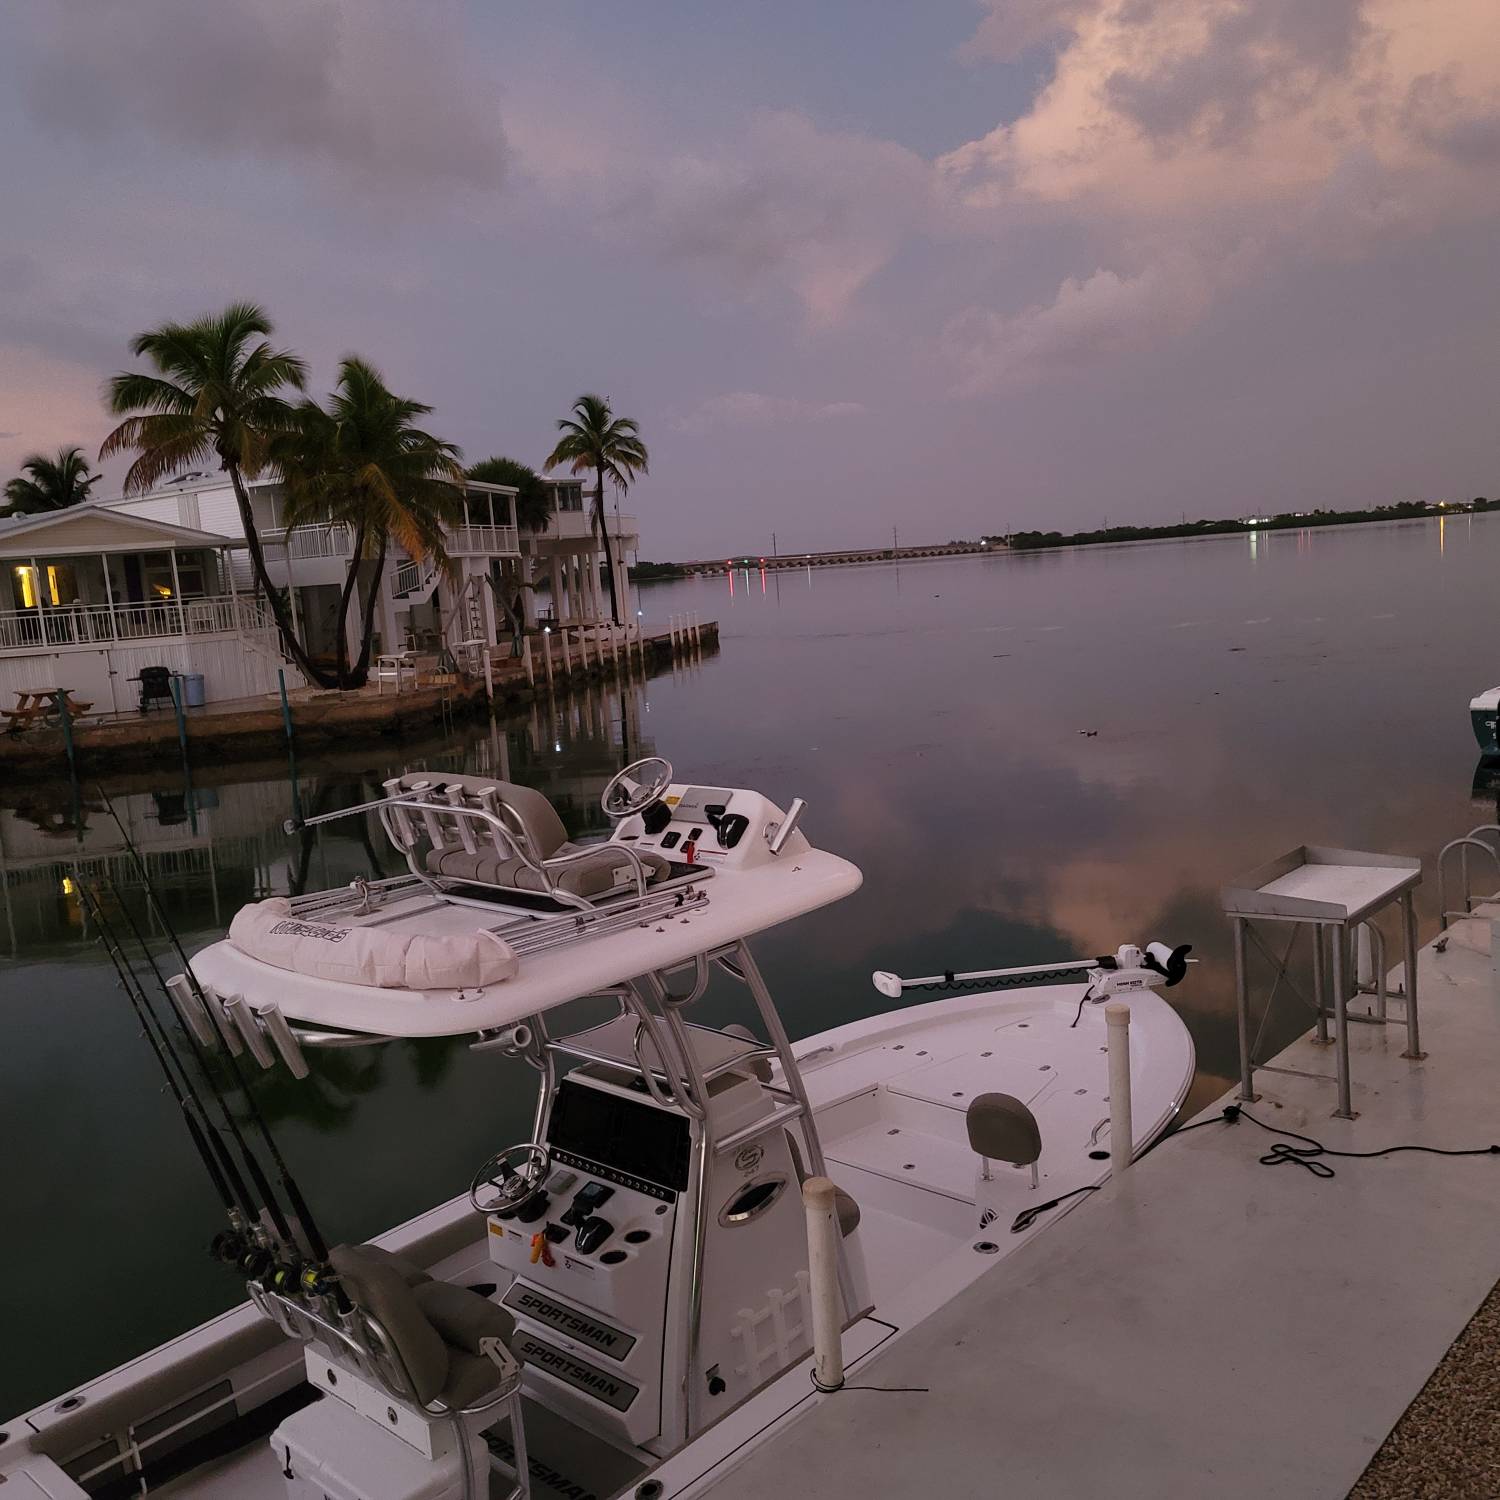 Title: Just waiting to head out fishing - On board their Sportsman Masters 247 Bay Boat - Location: Cudjoe key, FL. Participating in the Photo Contest #SportsmanAugust2021